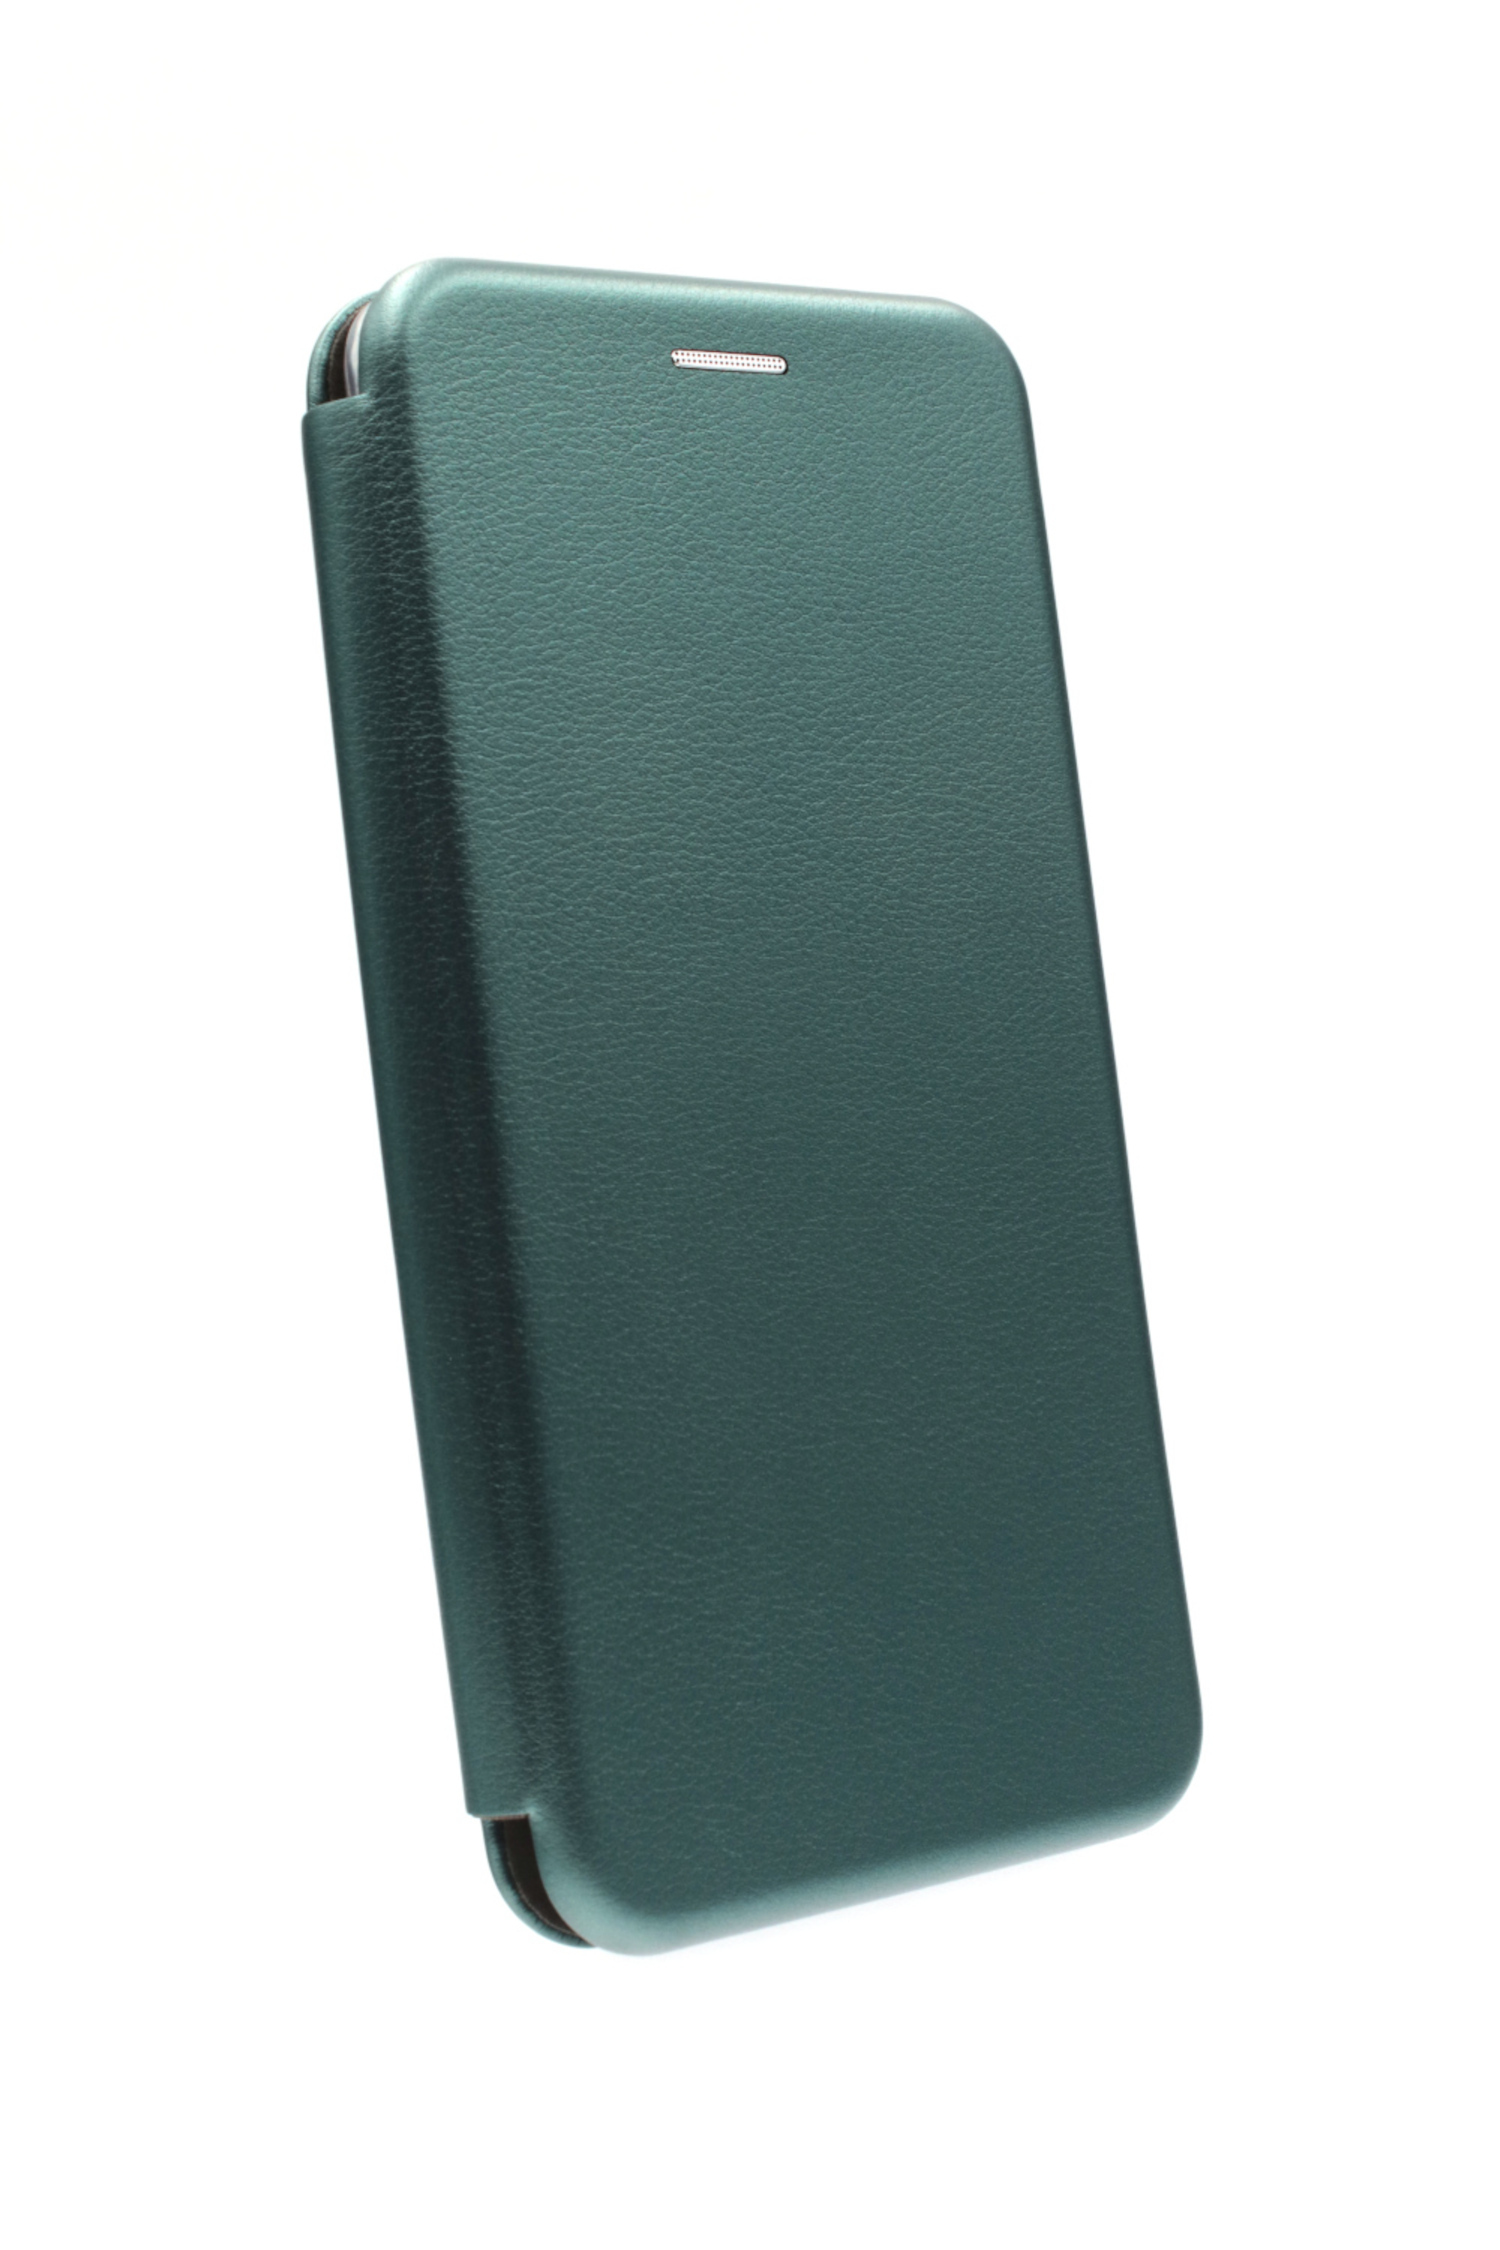 A12, Rounded, Dunkelgrün Bookcover, Samsung, Galaxy JAMCOVER Bookcase